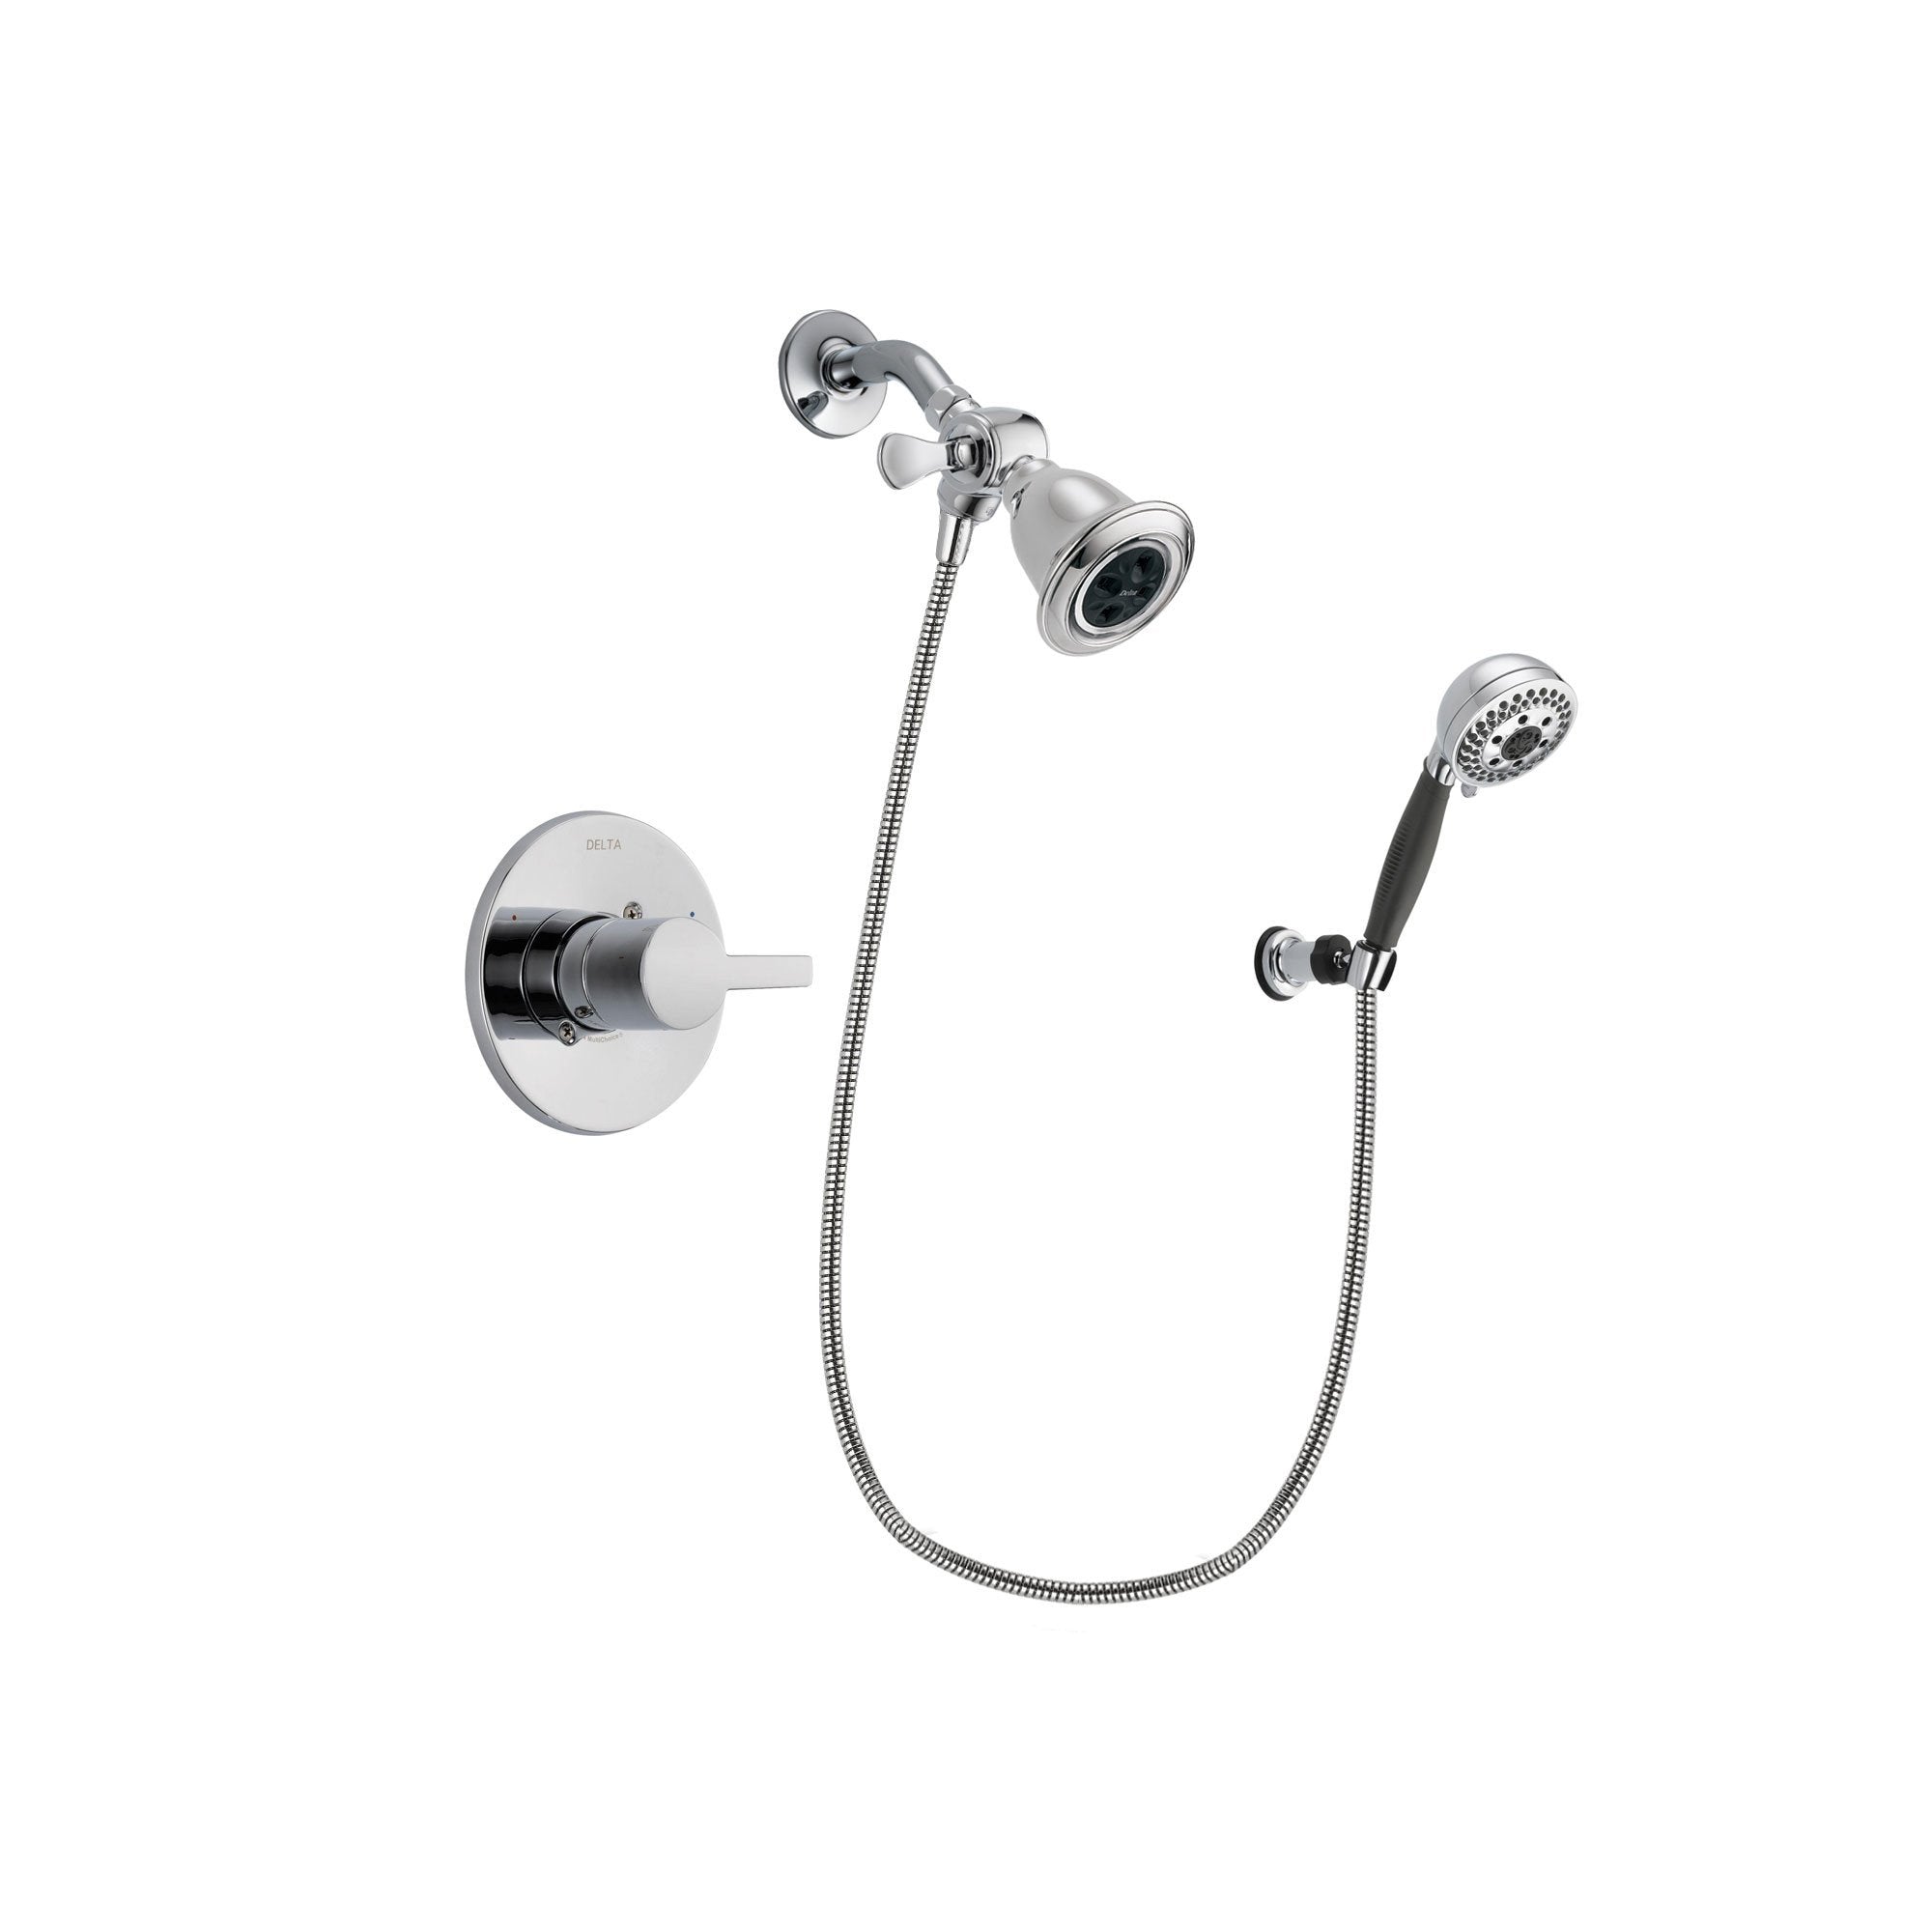 Delta Compel Chrome Shower Faucet System w/ Shower Head and Hand Shower DSP1154V